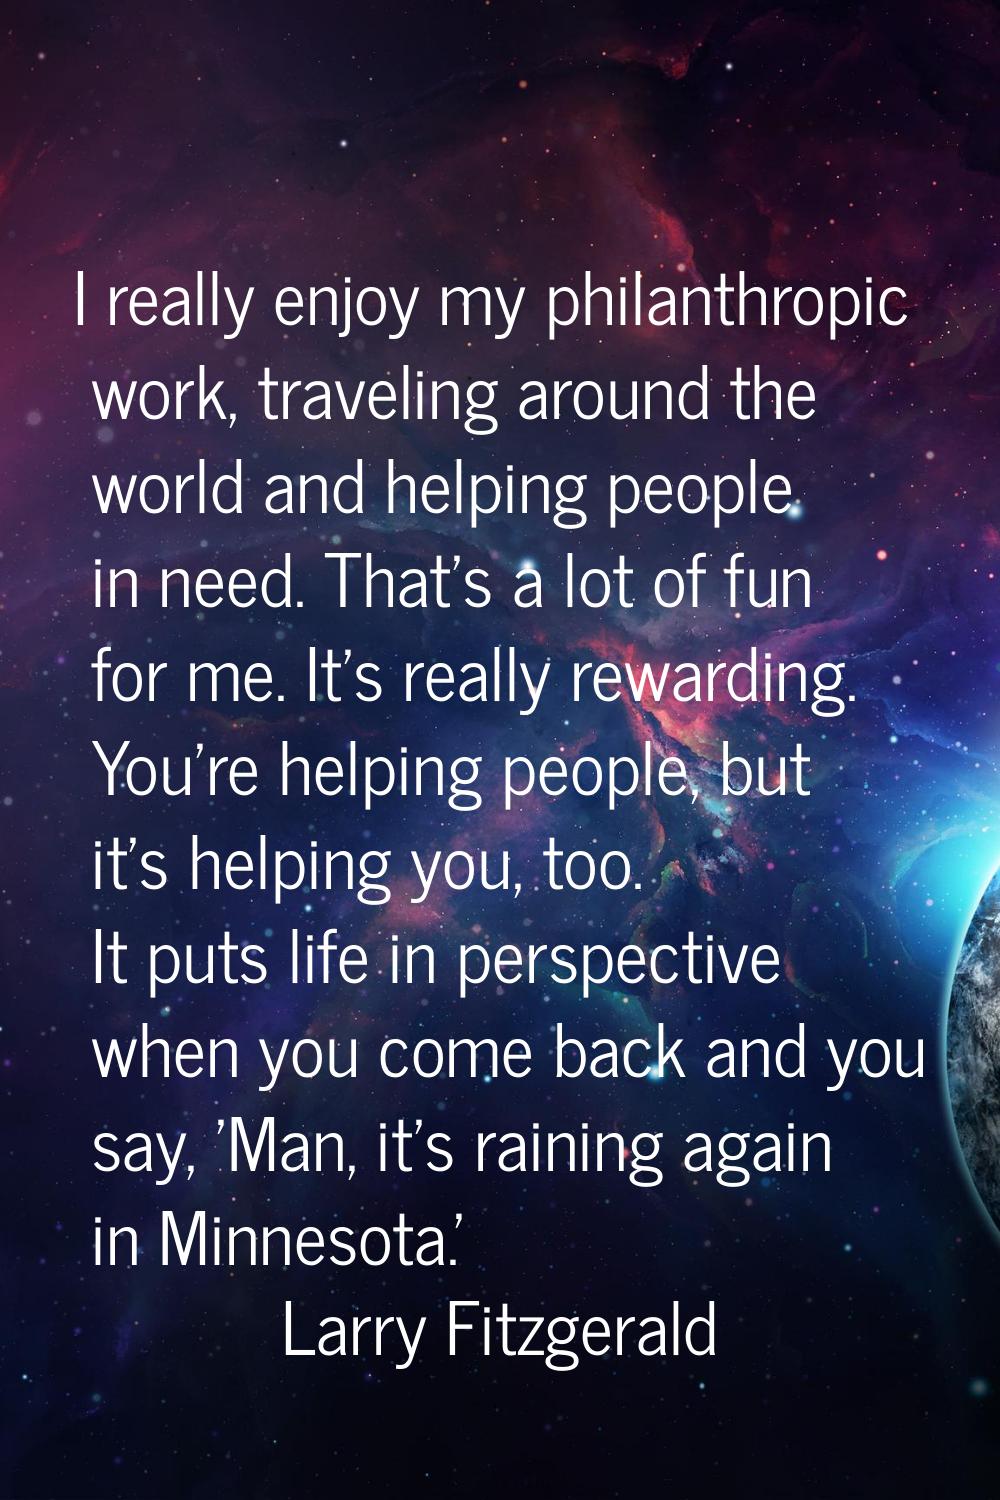 I really enjoy my philanthropic work, traveling around the world and helping people in need. That's